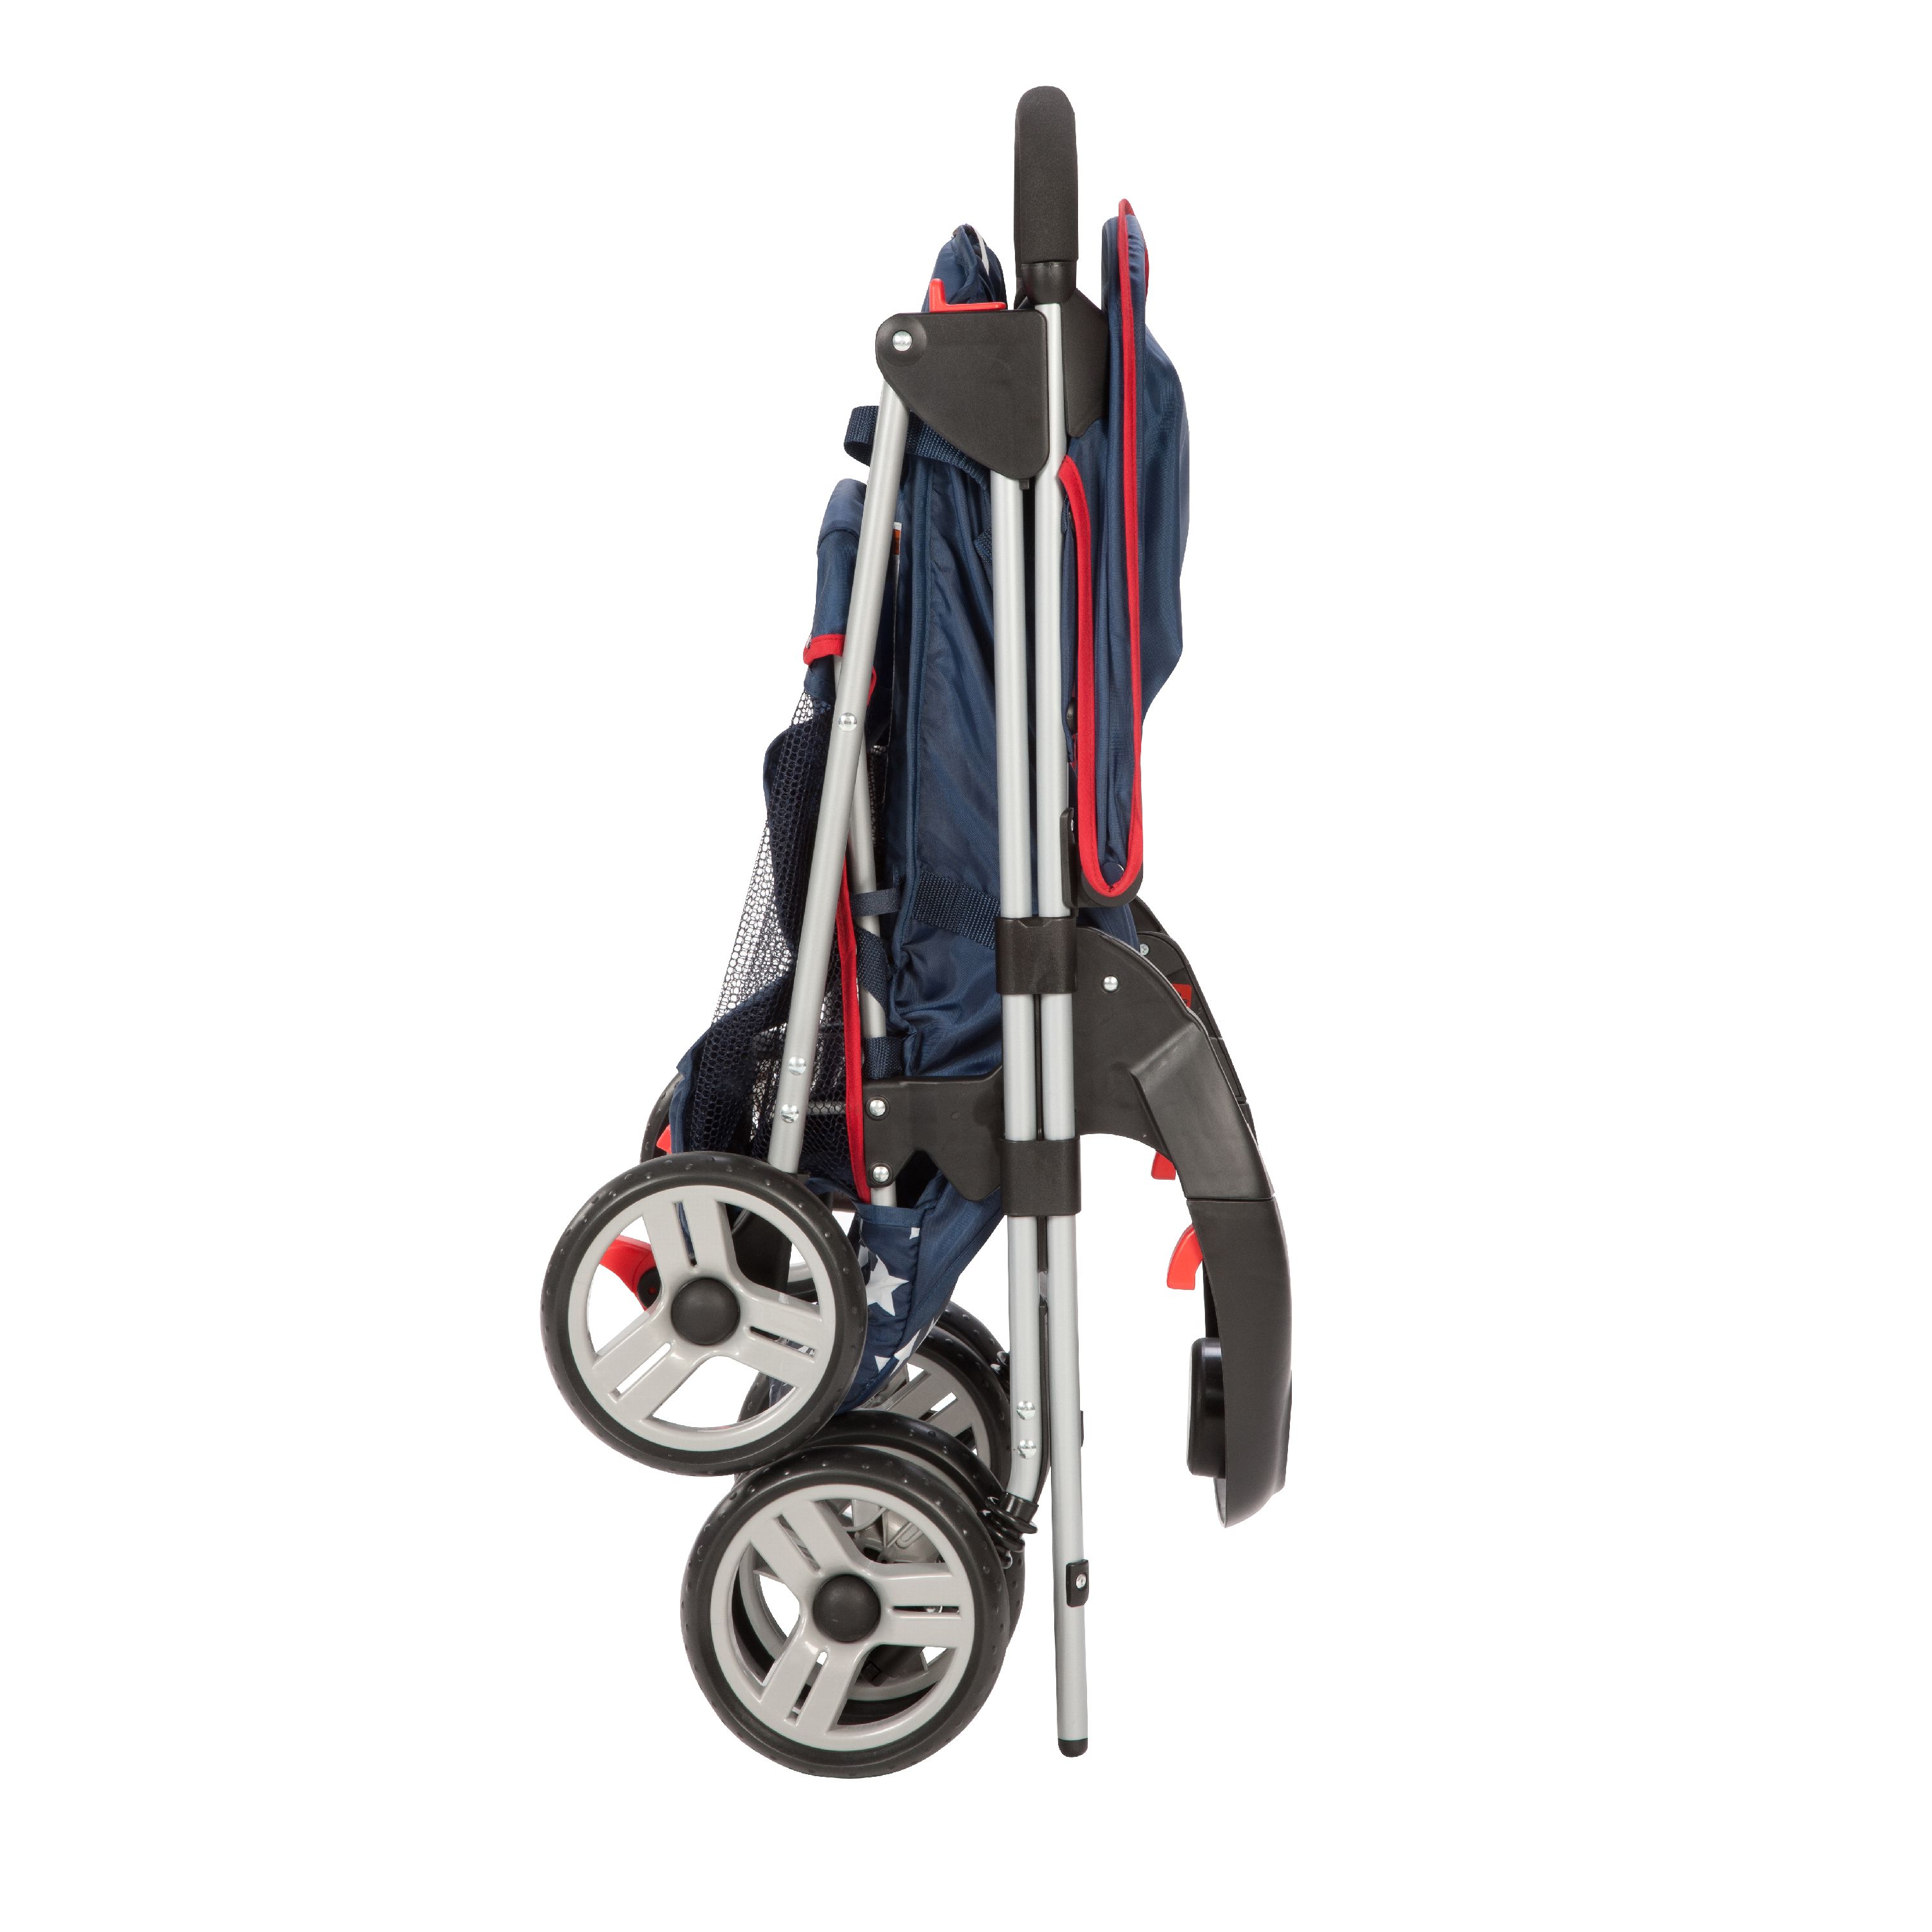 Cosco Commuter Compact Travel System - image 4 of 6